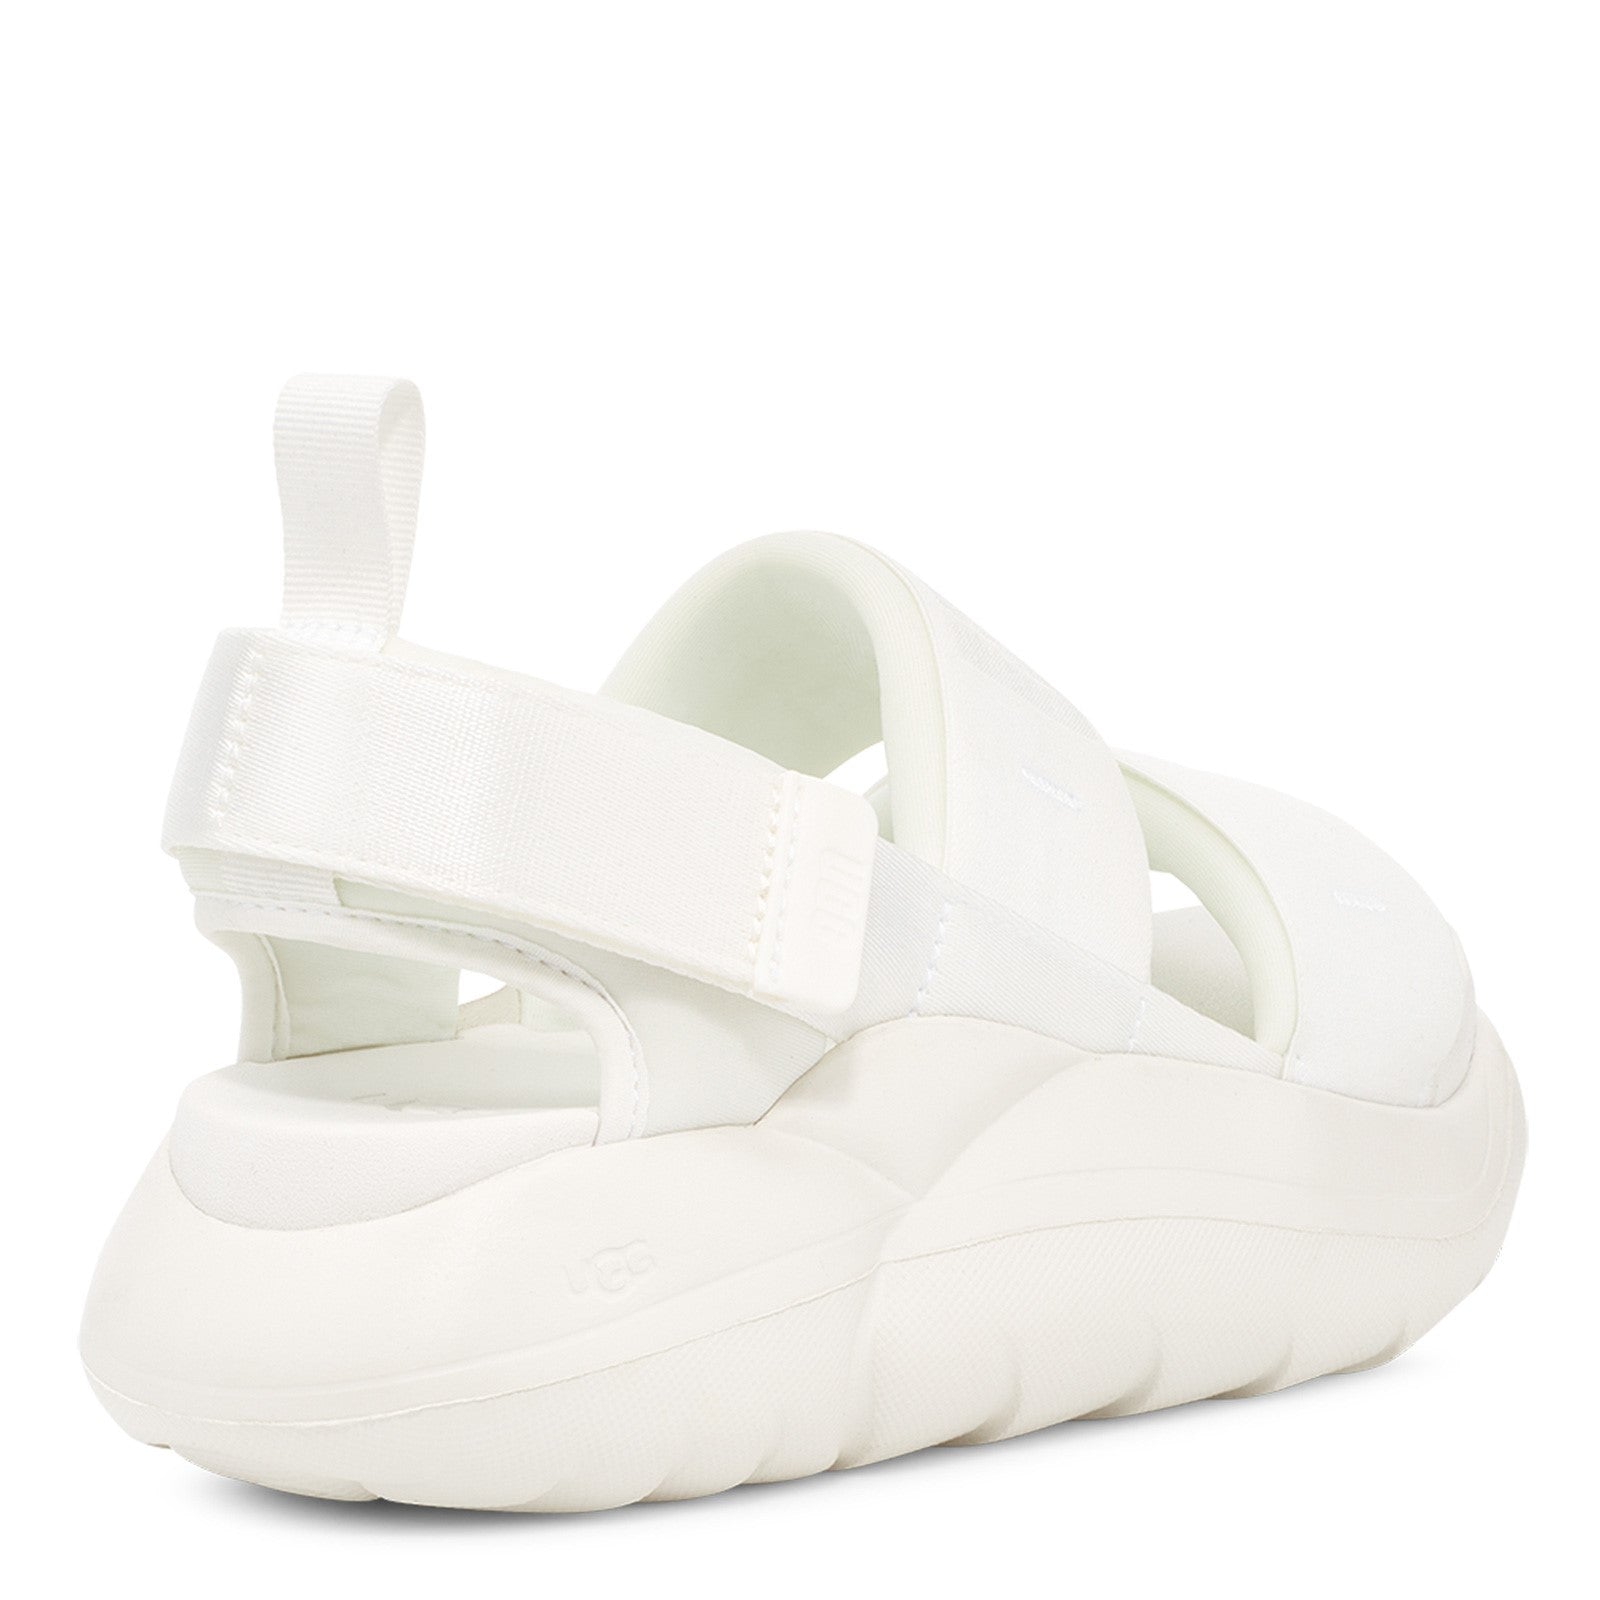 Back angle view of the Women's LA Cloud Sport sandal by UGG in the color white